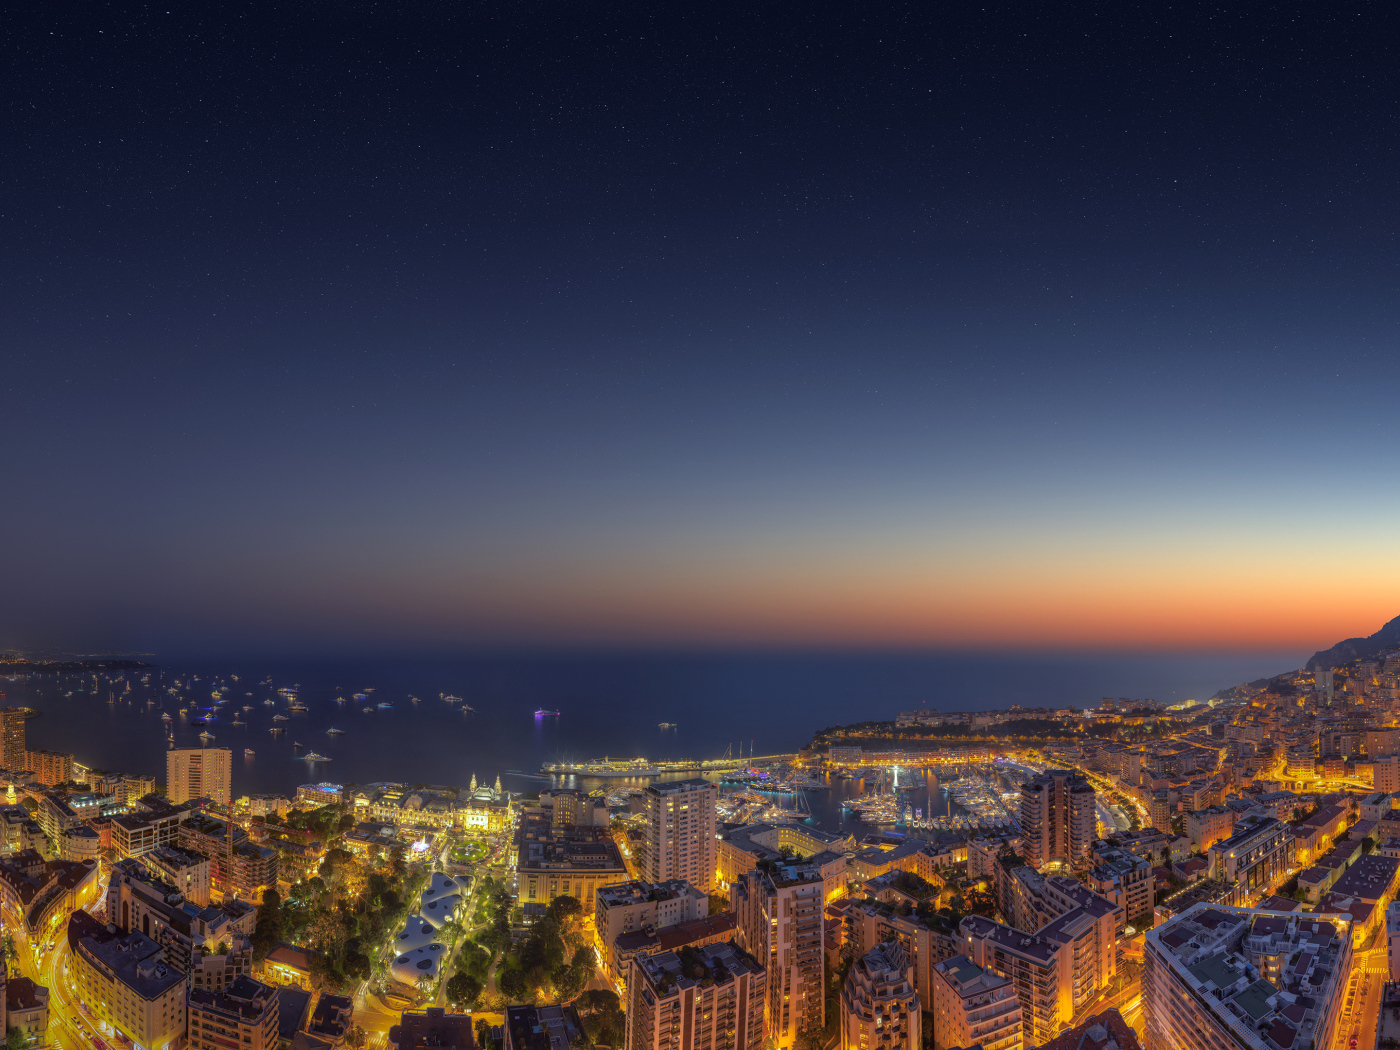 View of the night city of Monaco under a blue sky